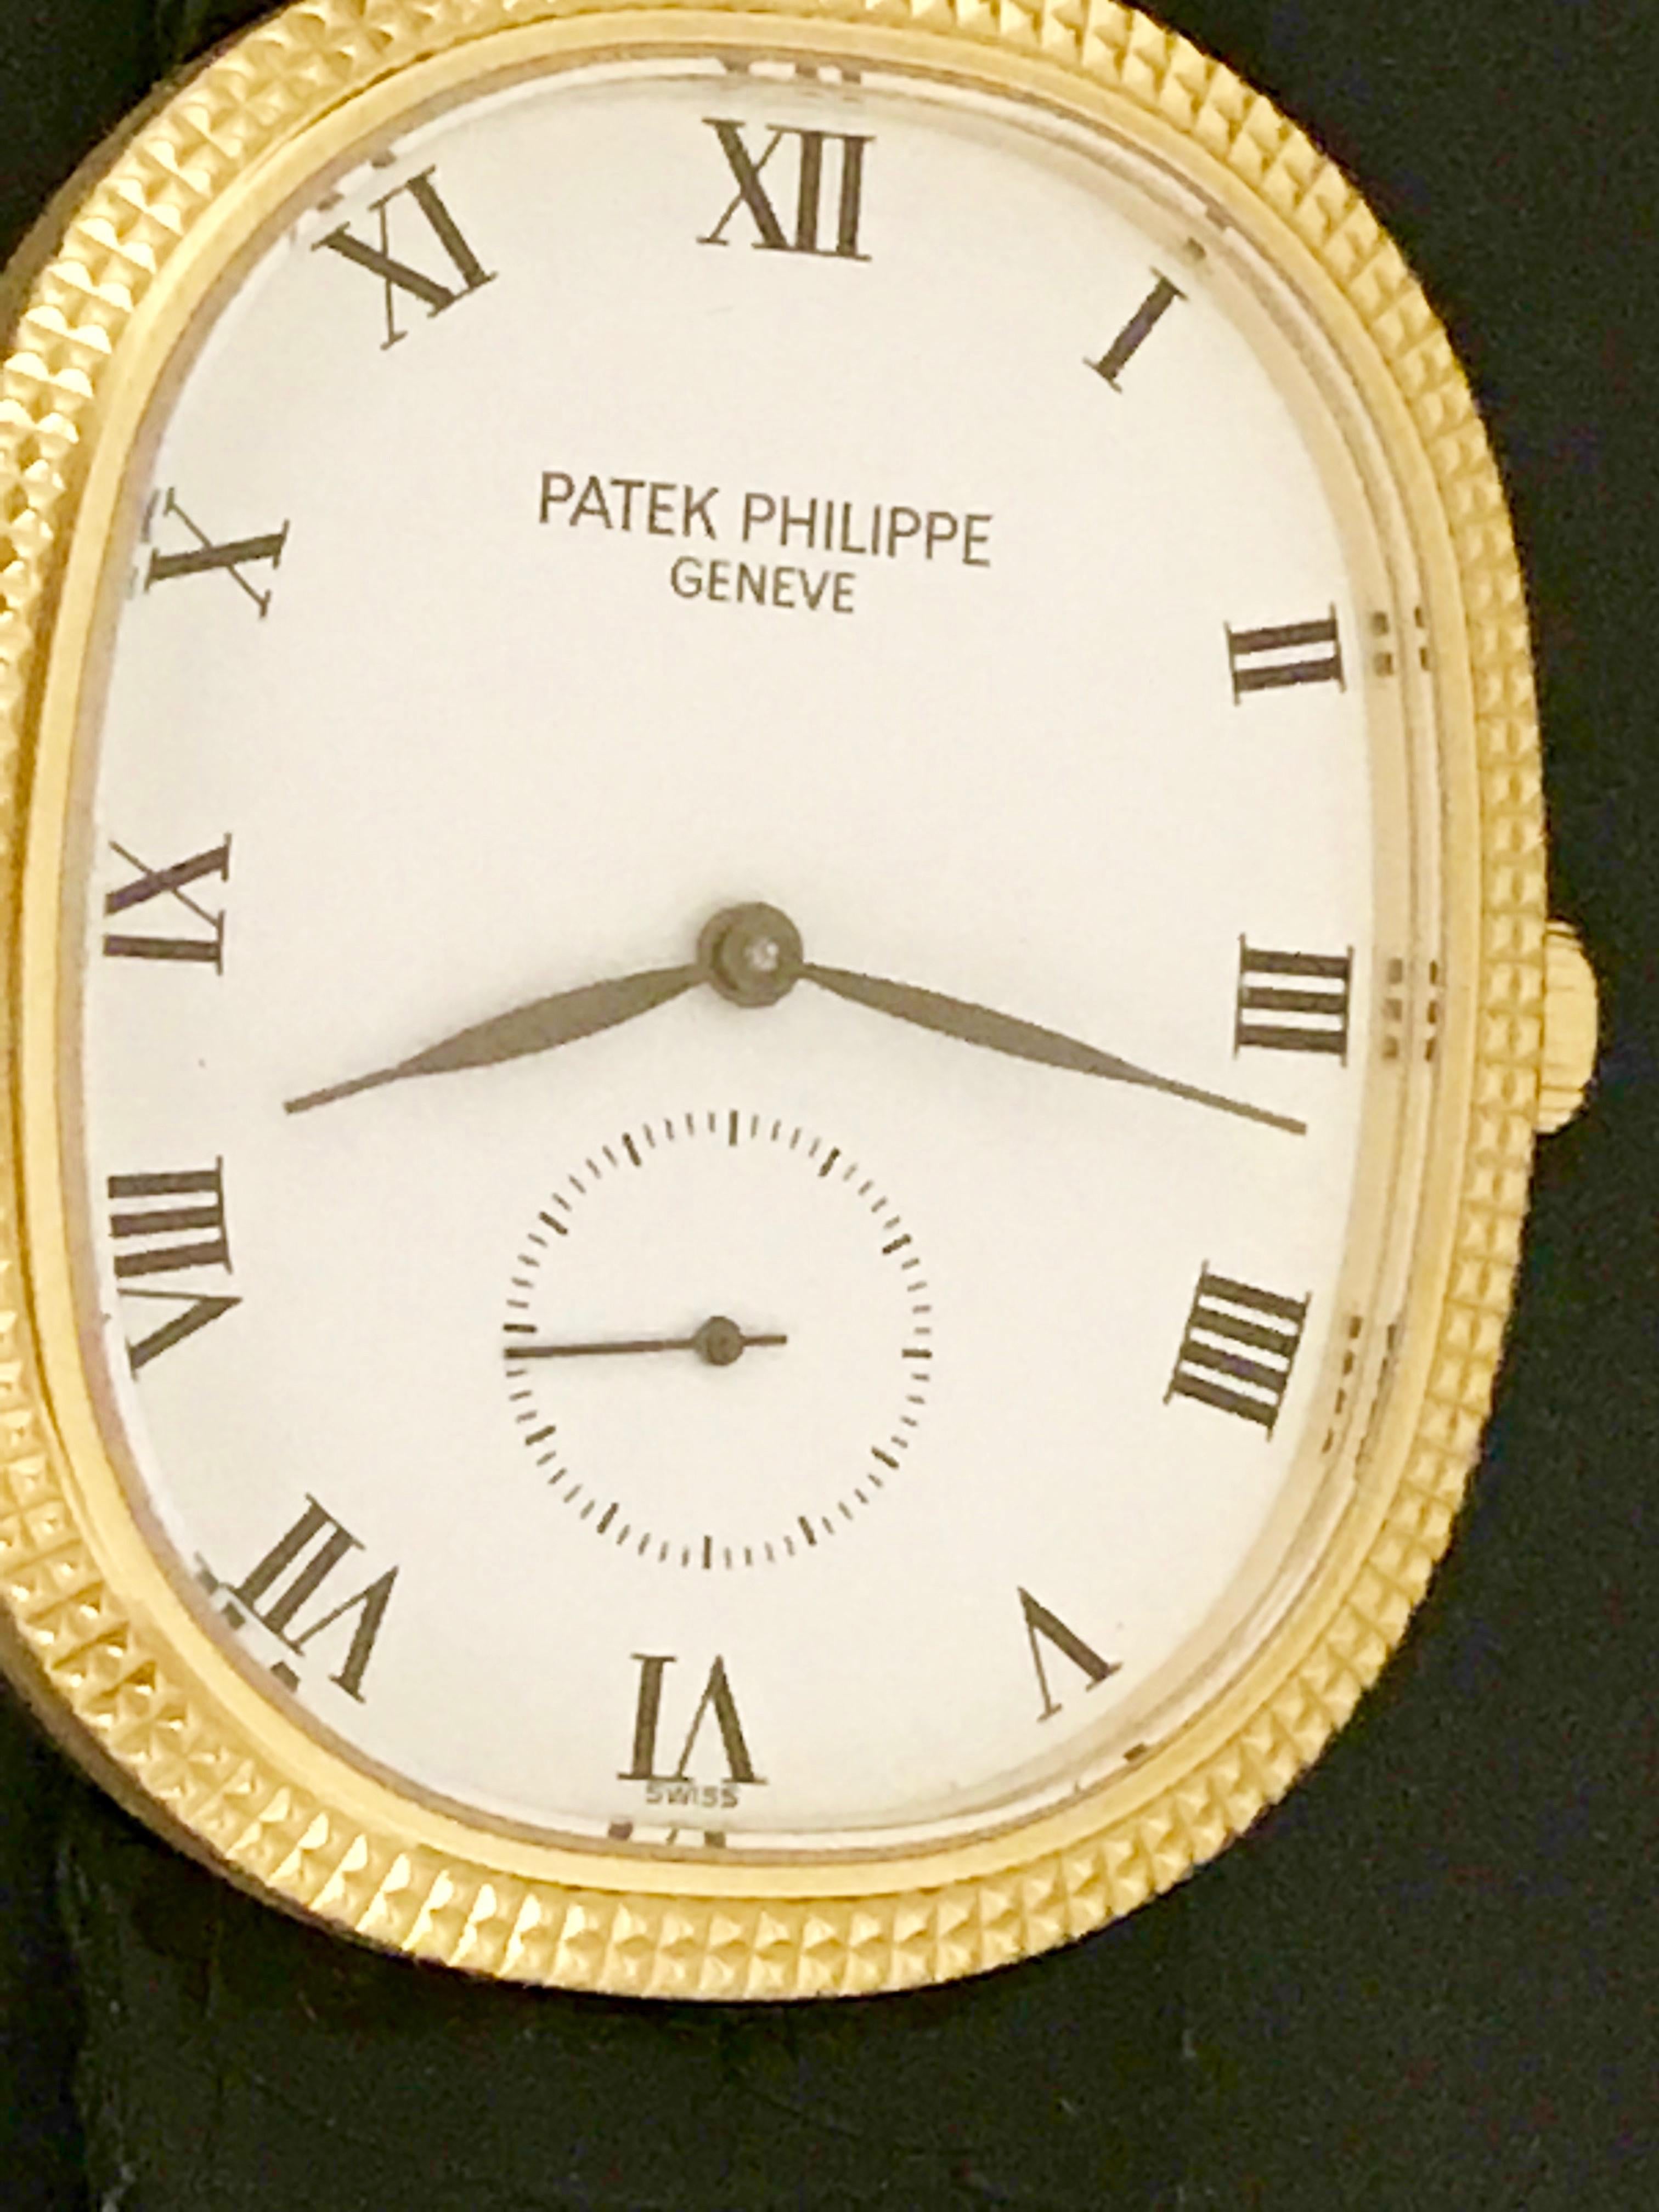 Patek Philippe Men's 3978 Manual Wind Wrist Watch in 18K Yellow Gold.  This timepiece features an 18K Yellow Gold ellipse case, measuring 27x32mm in diameter.  White Dial with black Roman numerals. Black alligator strap with 18k Yellow Gold Patek